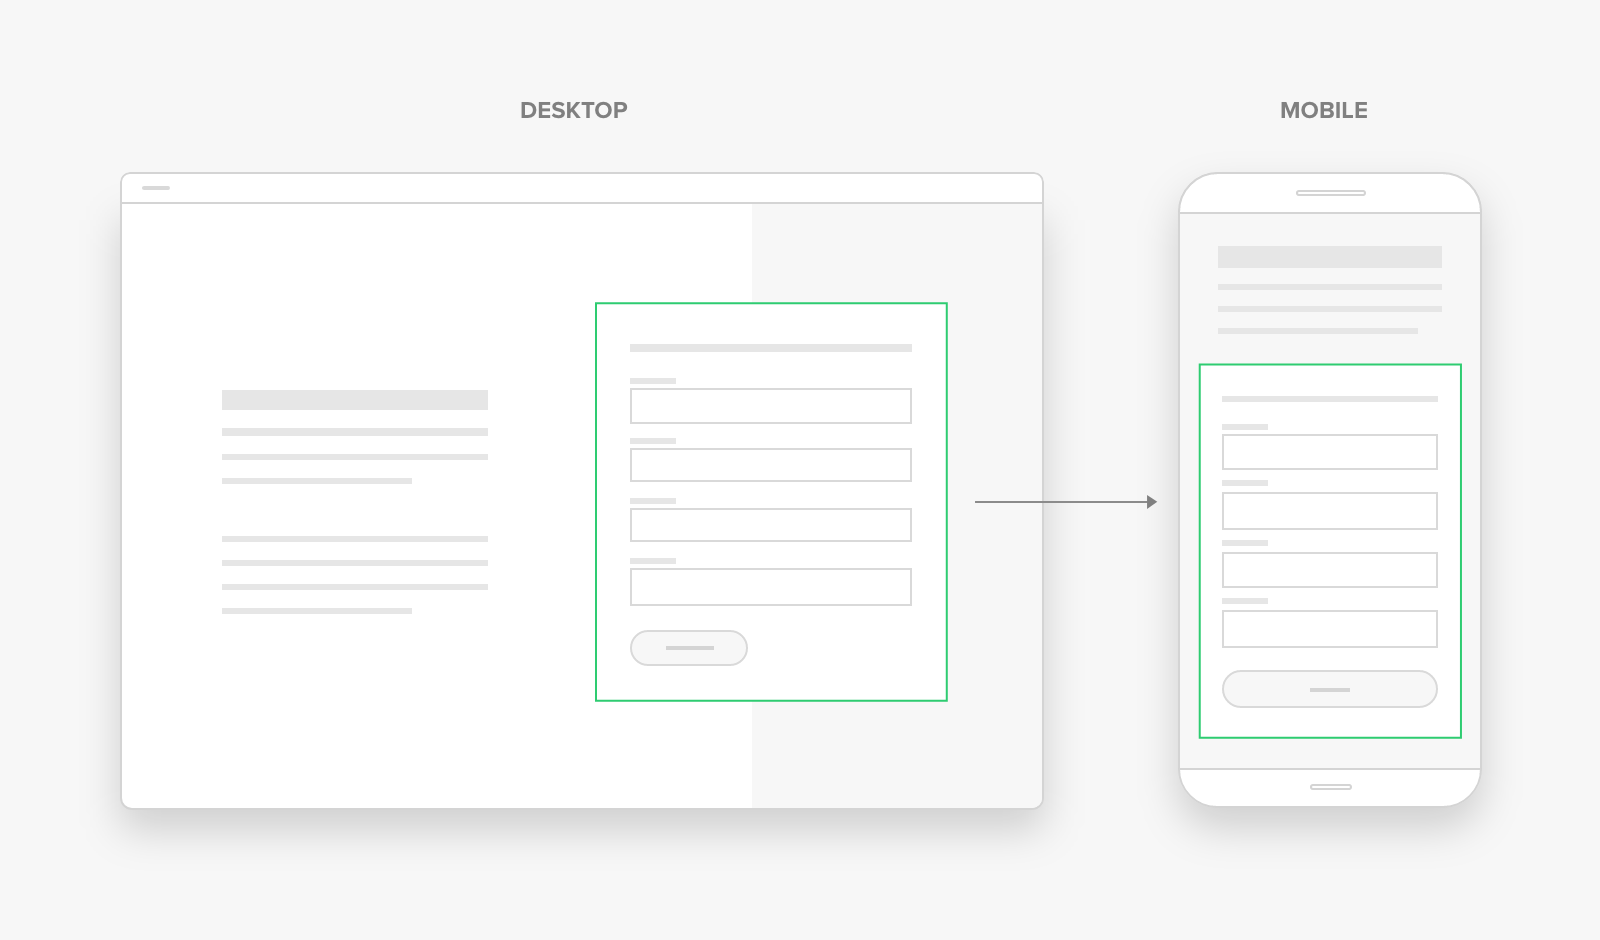 Get More Form Submissions With These Best Practices